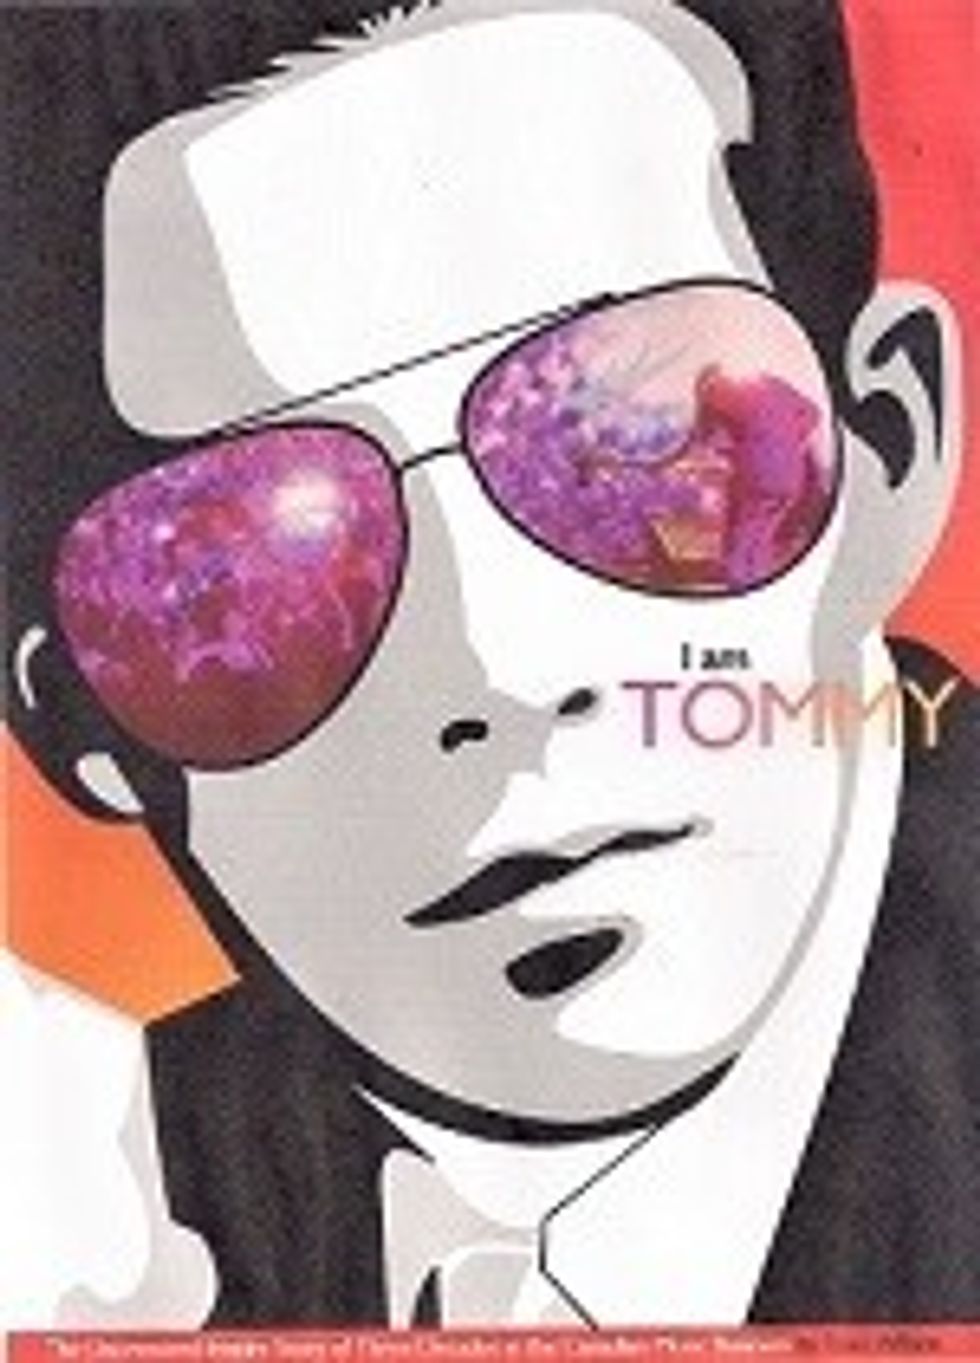 An Excerpt From 'I Am Tommy' By Tom Wilson